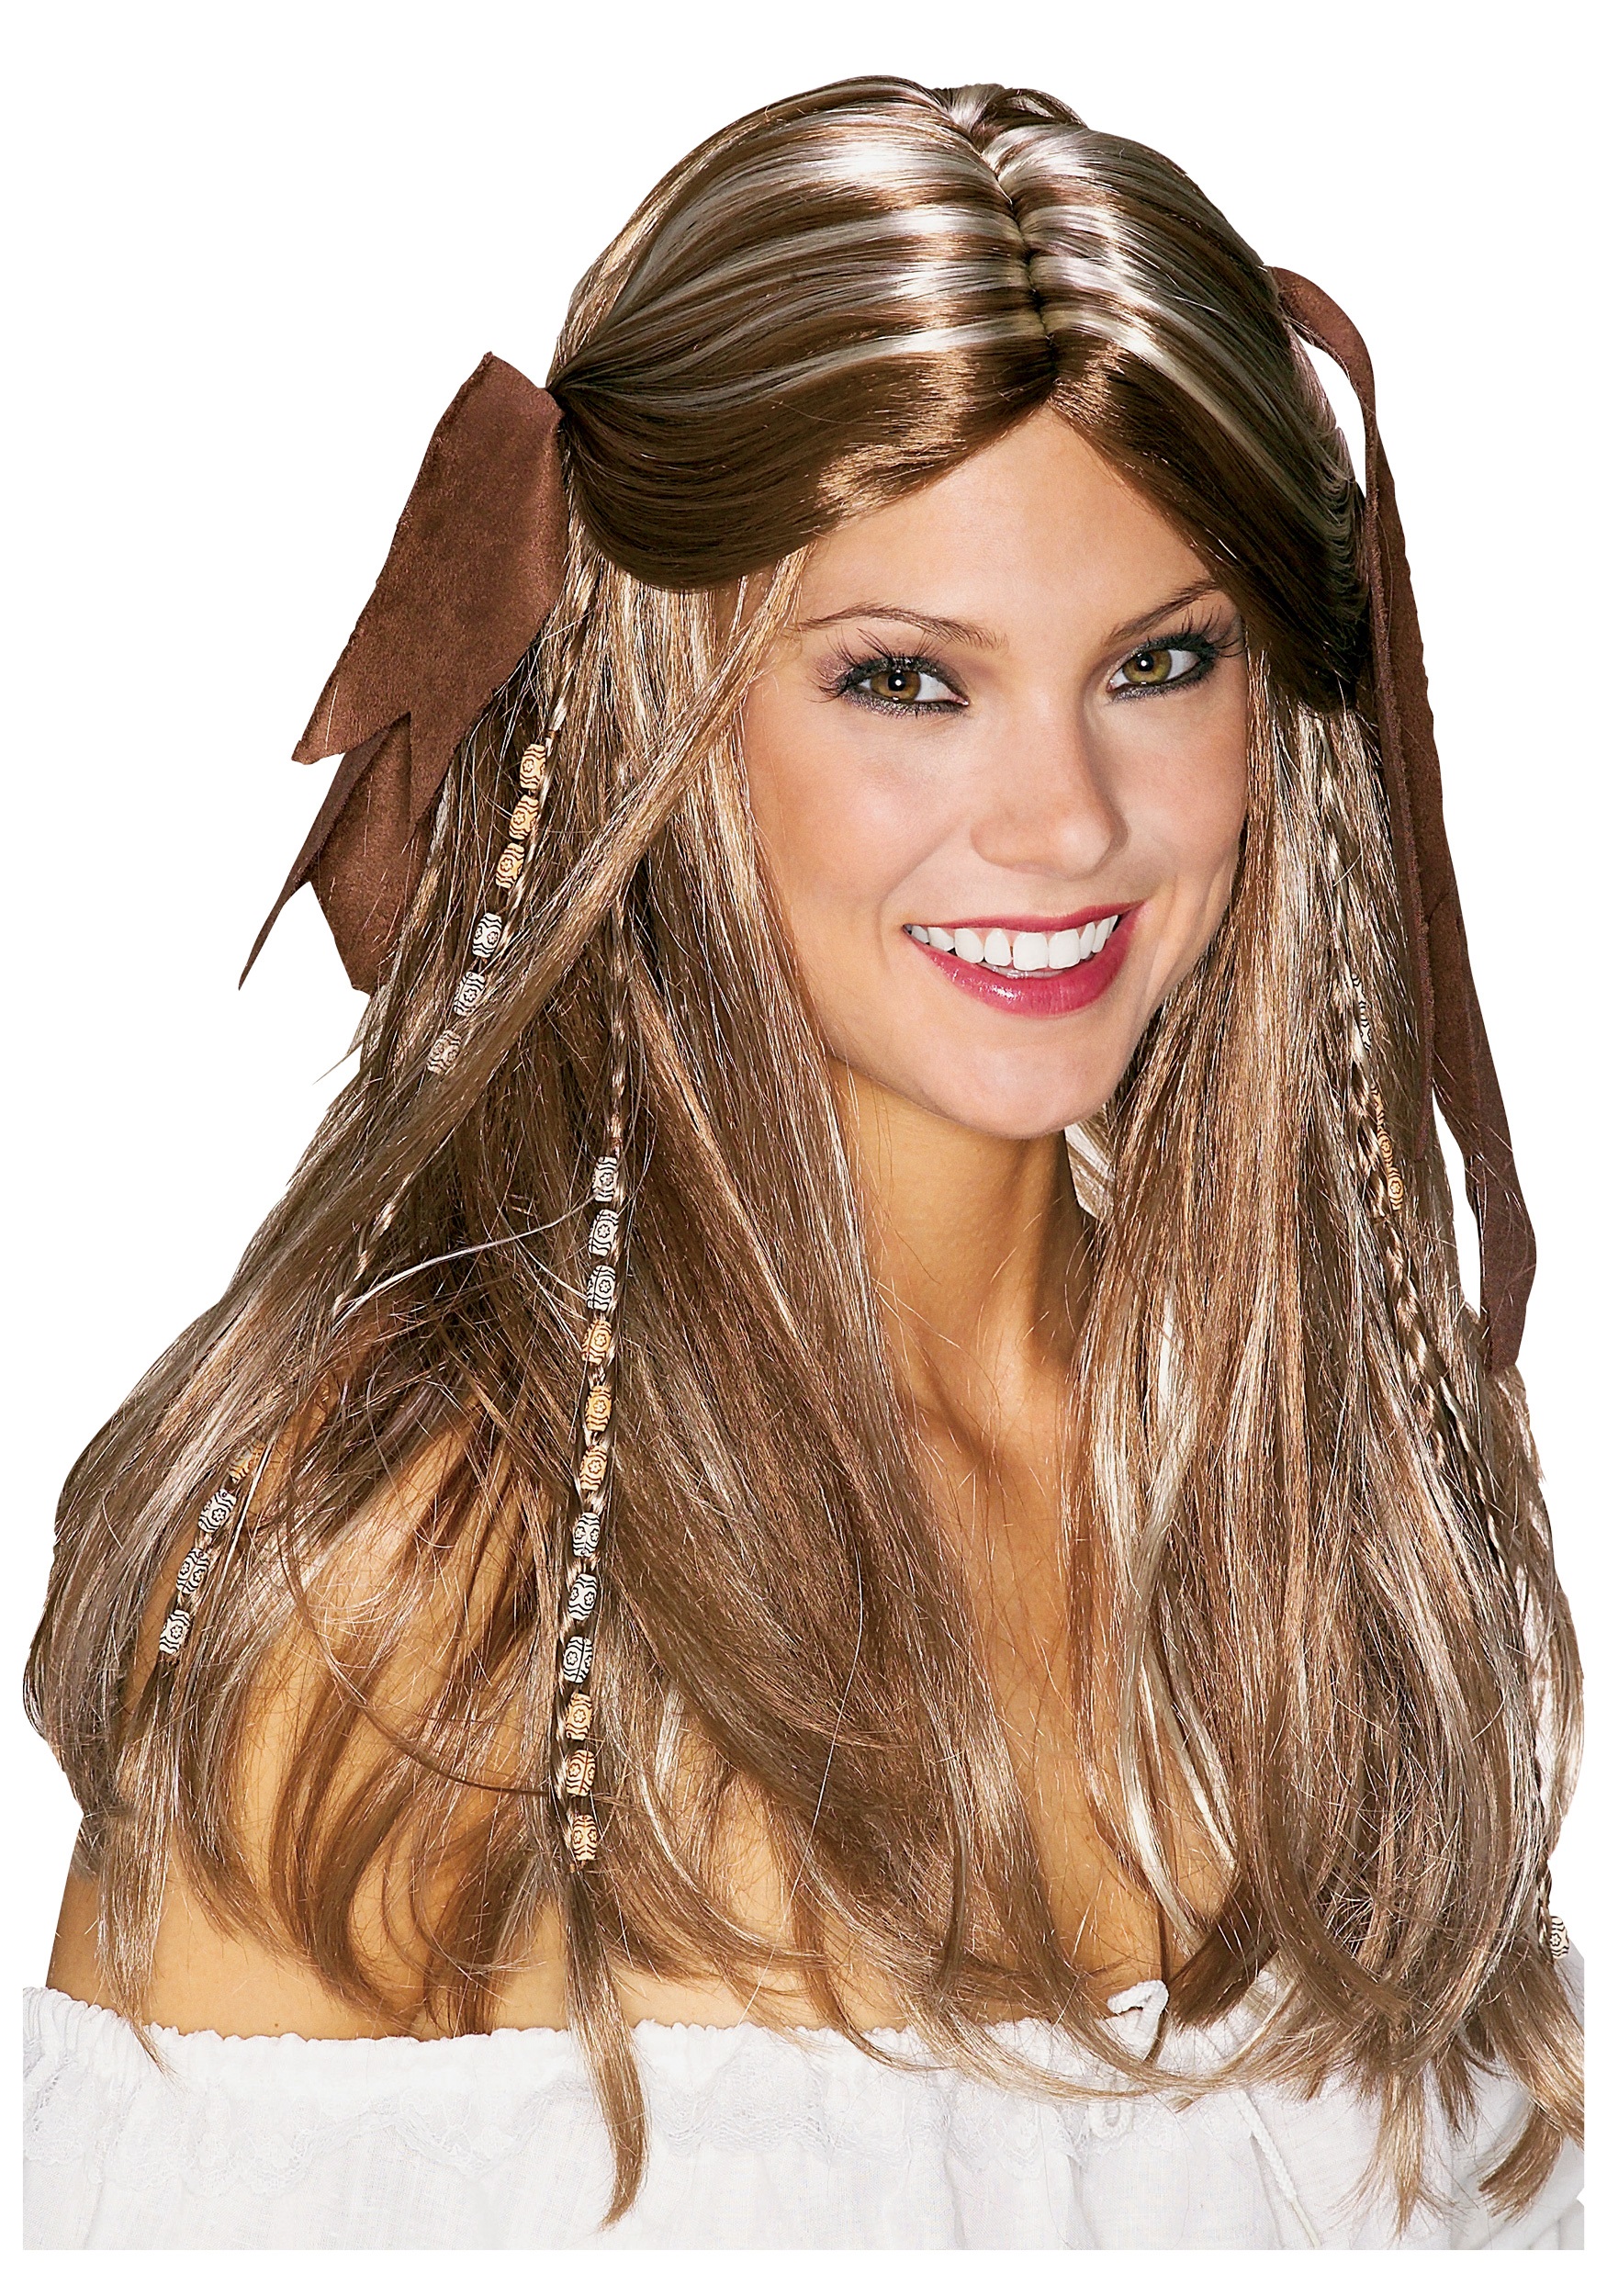 Women’s Caribbean Pirate Wench Wig